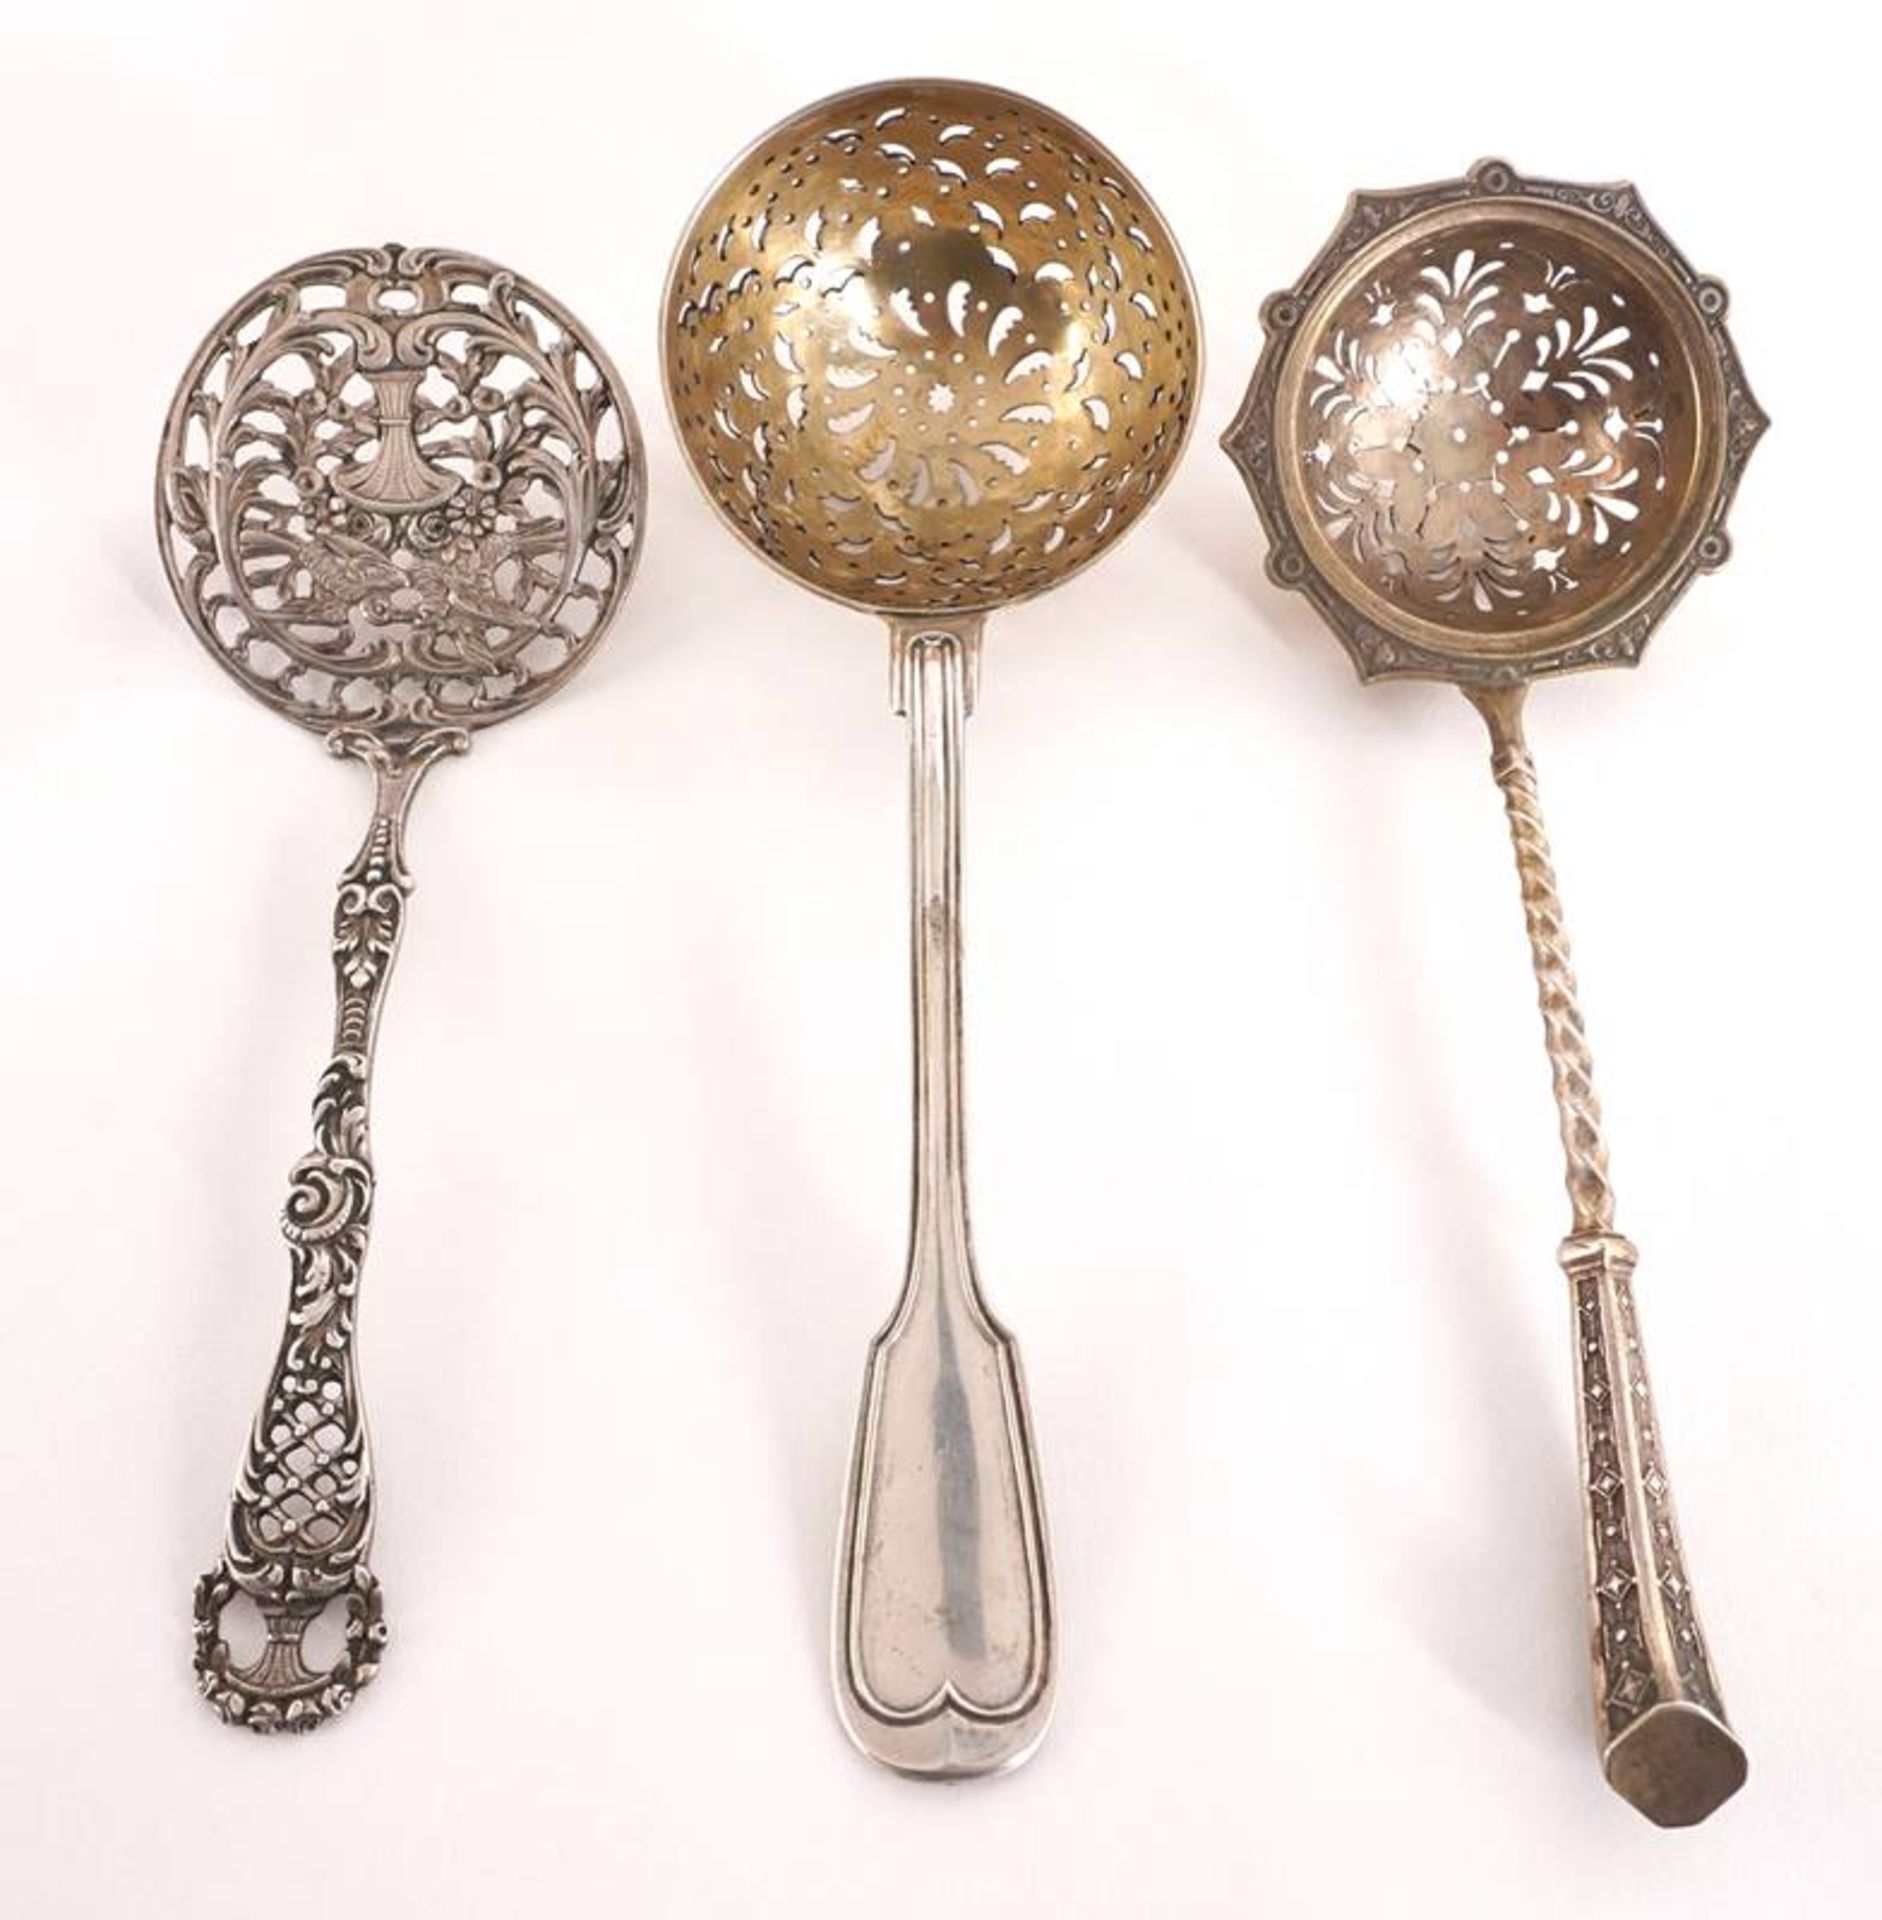 Three Slotted Spoons